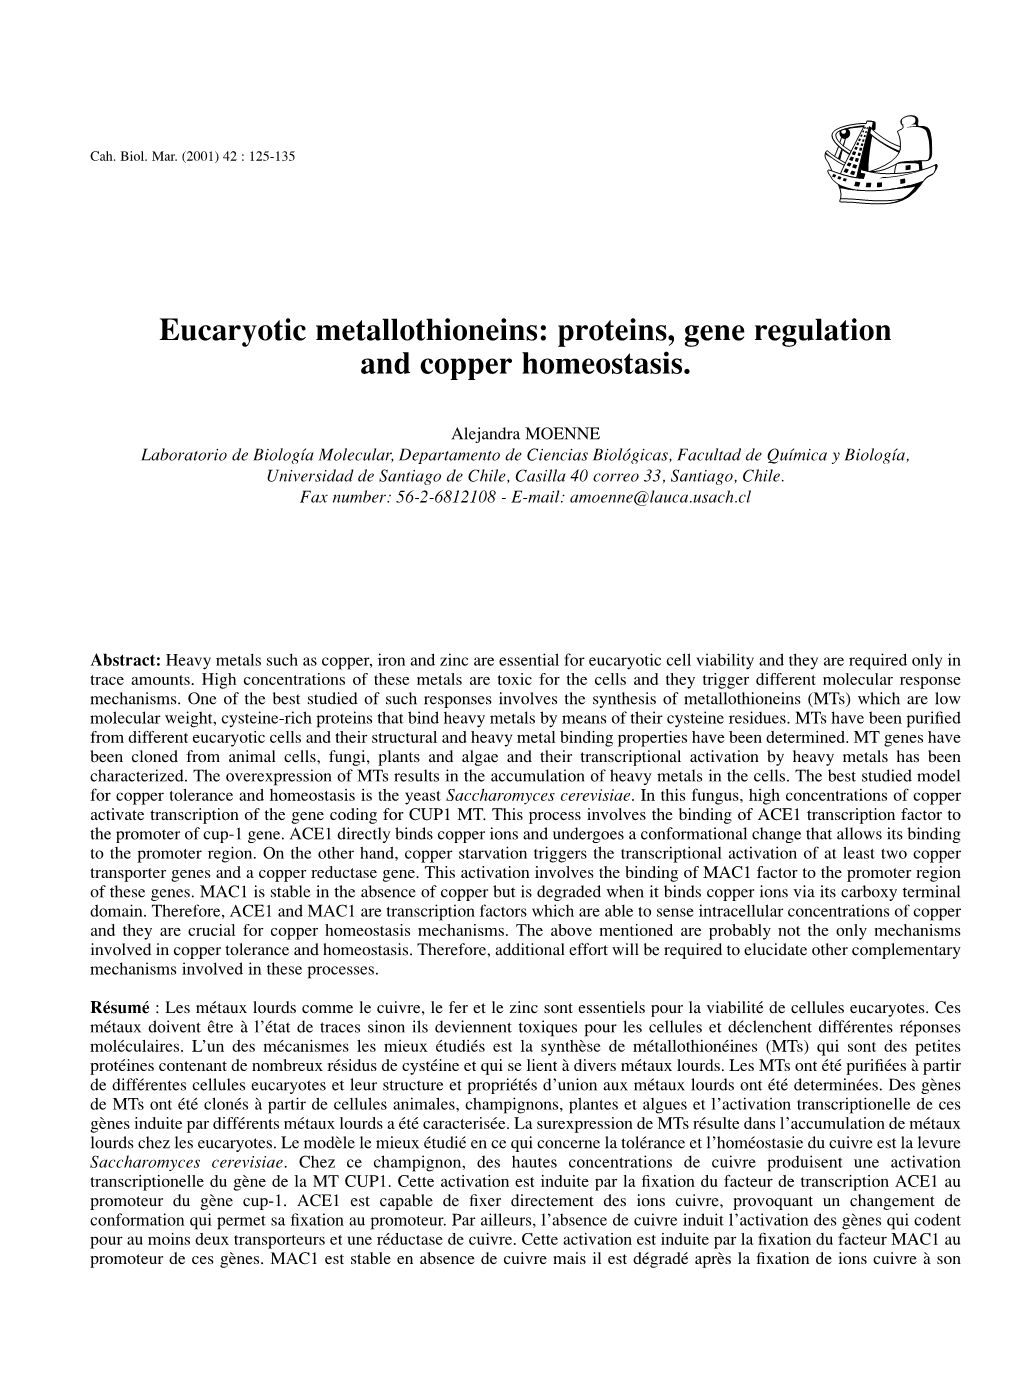 Eucaryotic Metallothioneins: Proteins, Gene Regulation and Copper Homeostasis